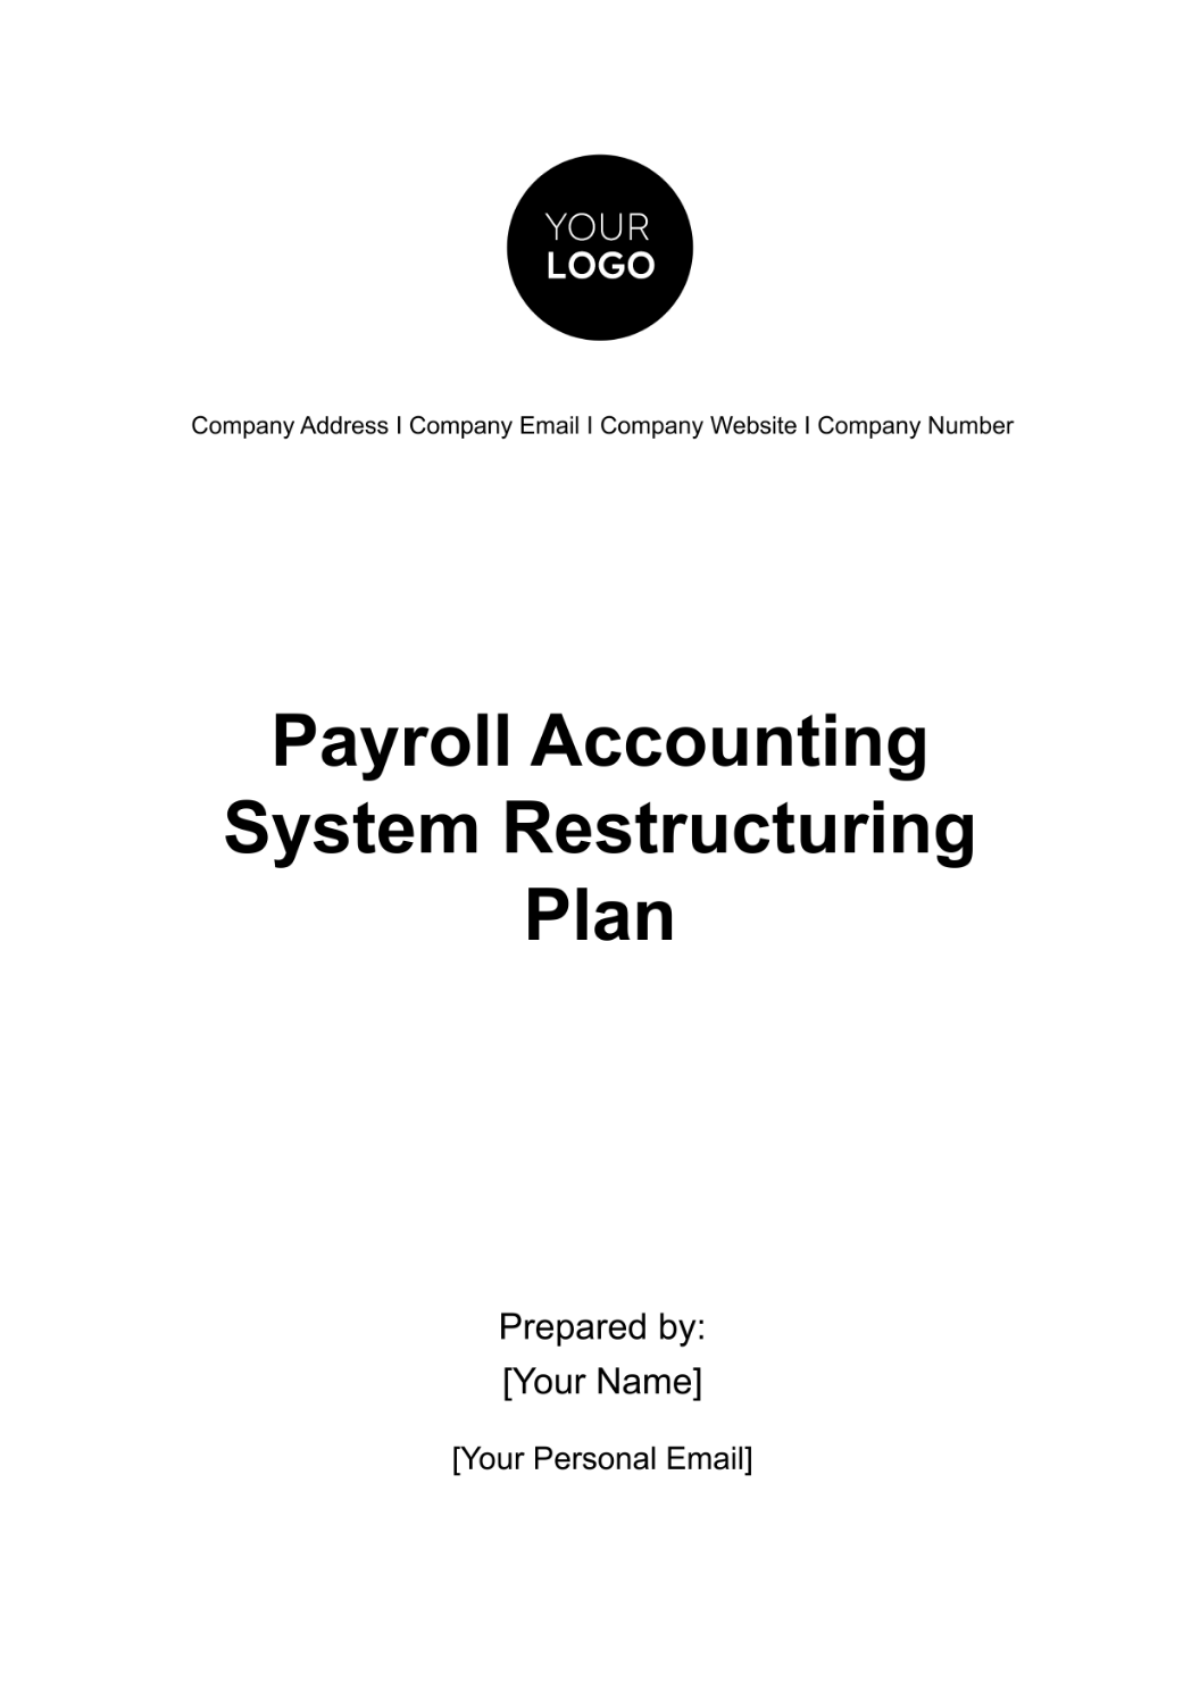 Payroll Accounting System Restructuring Plan Template